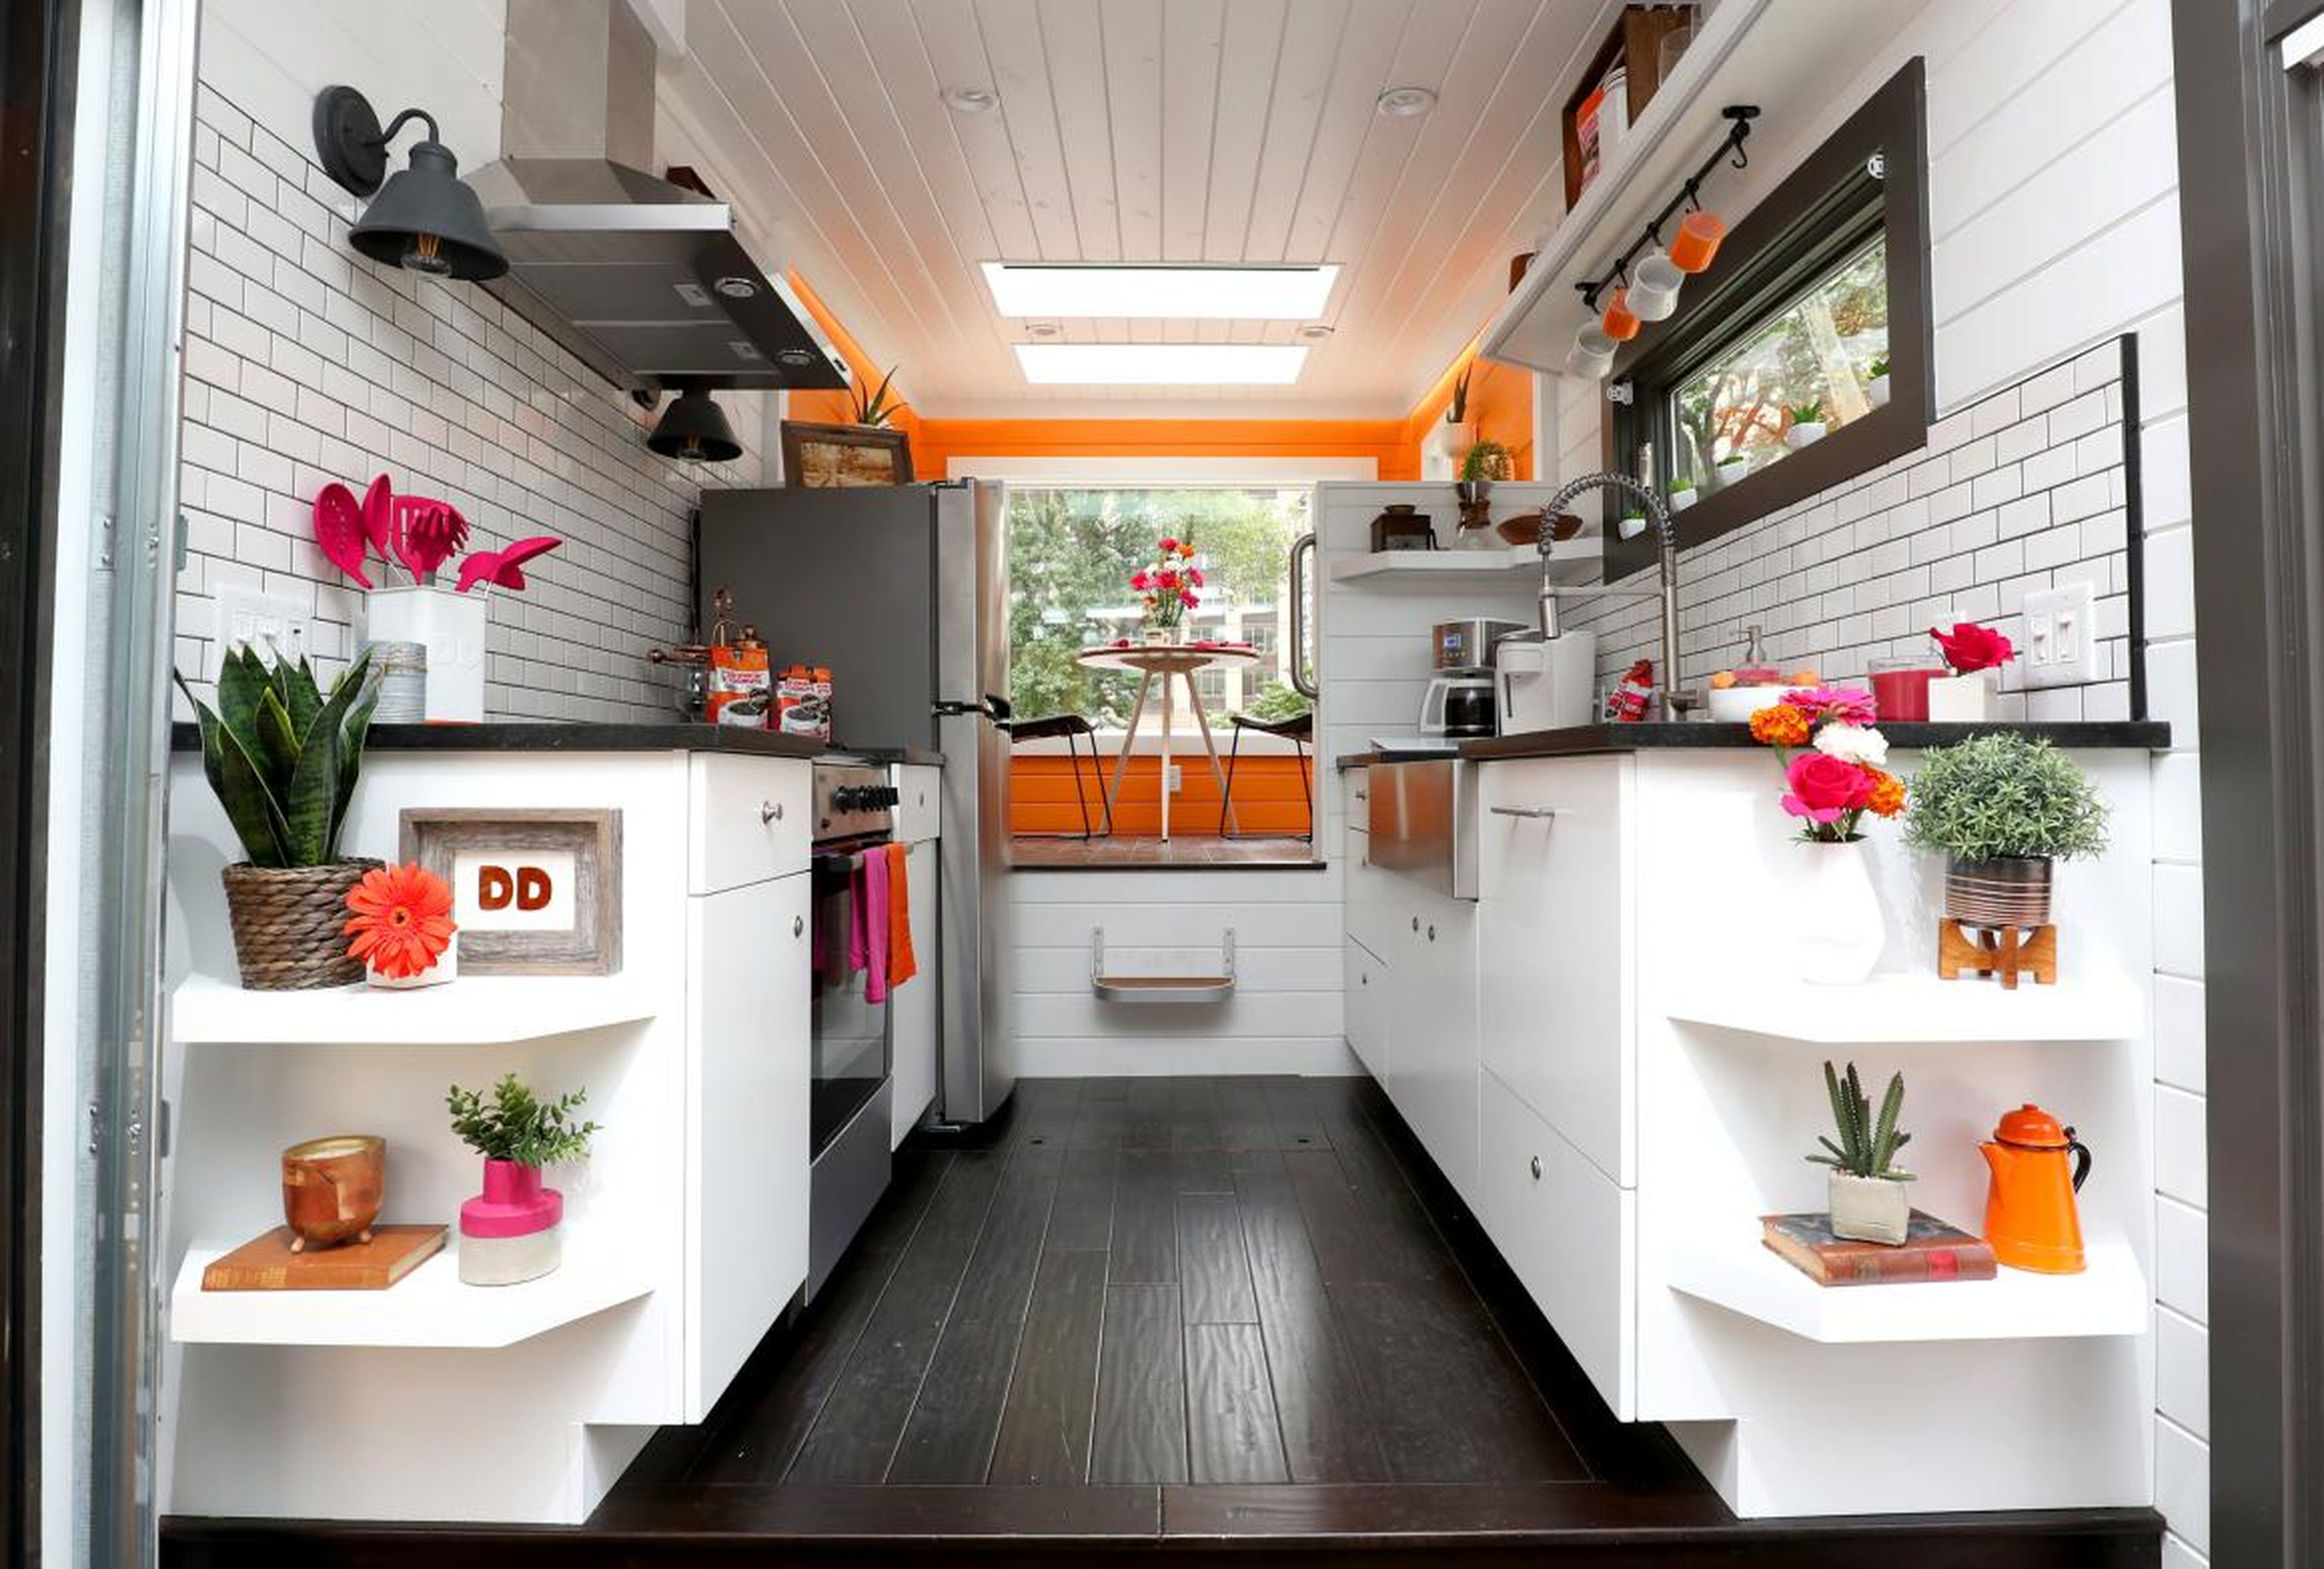 Dunkin Donuts has also debuted a tiny home design in New York City. This one runs entirely on coffee.